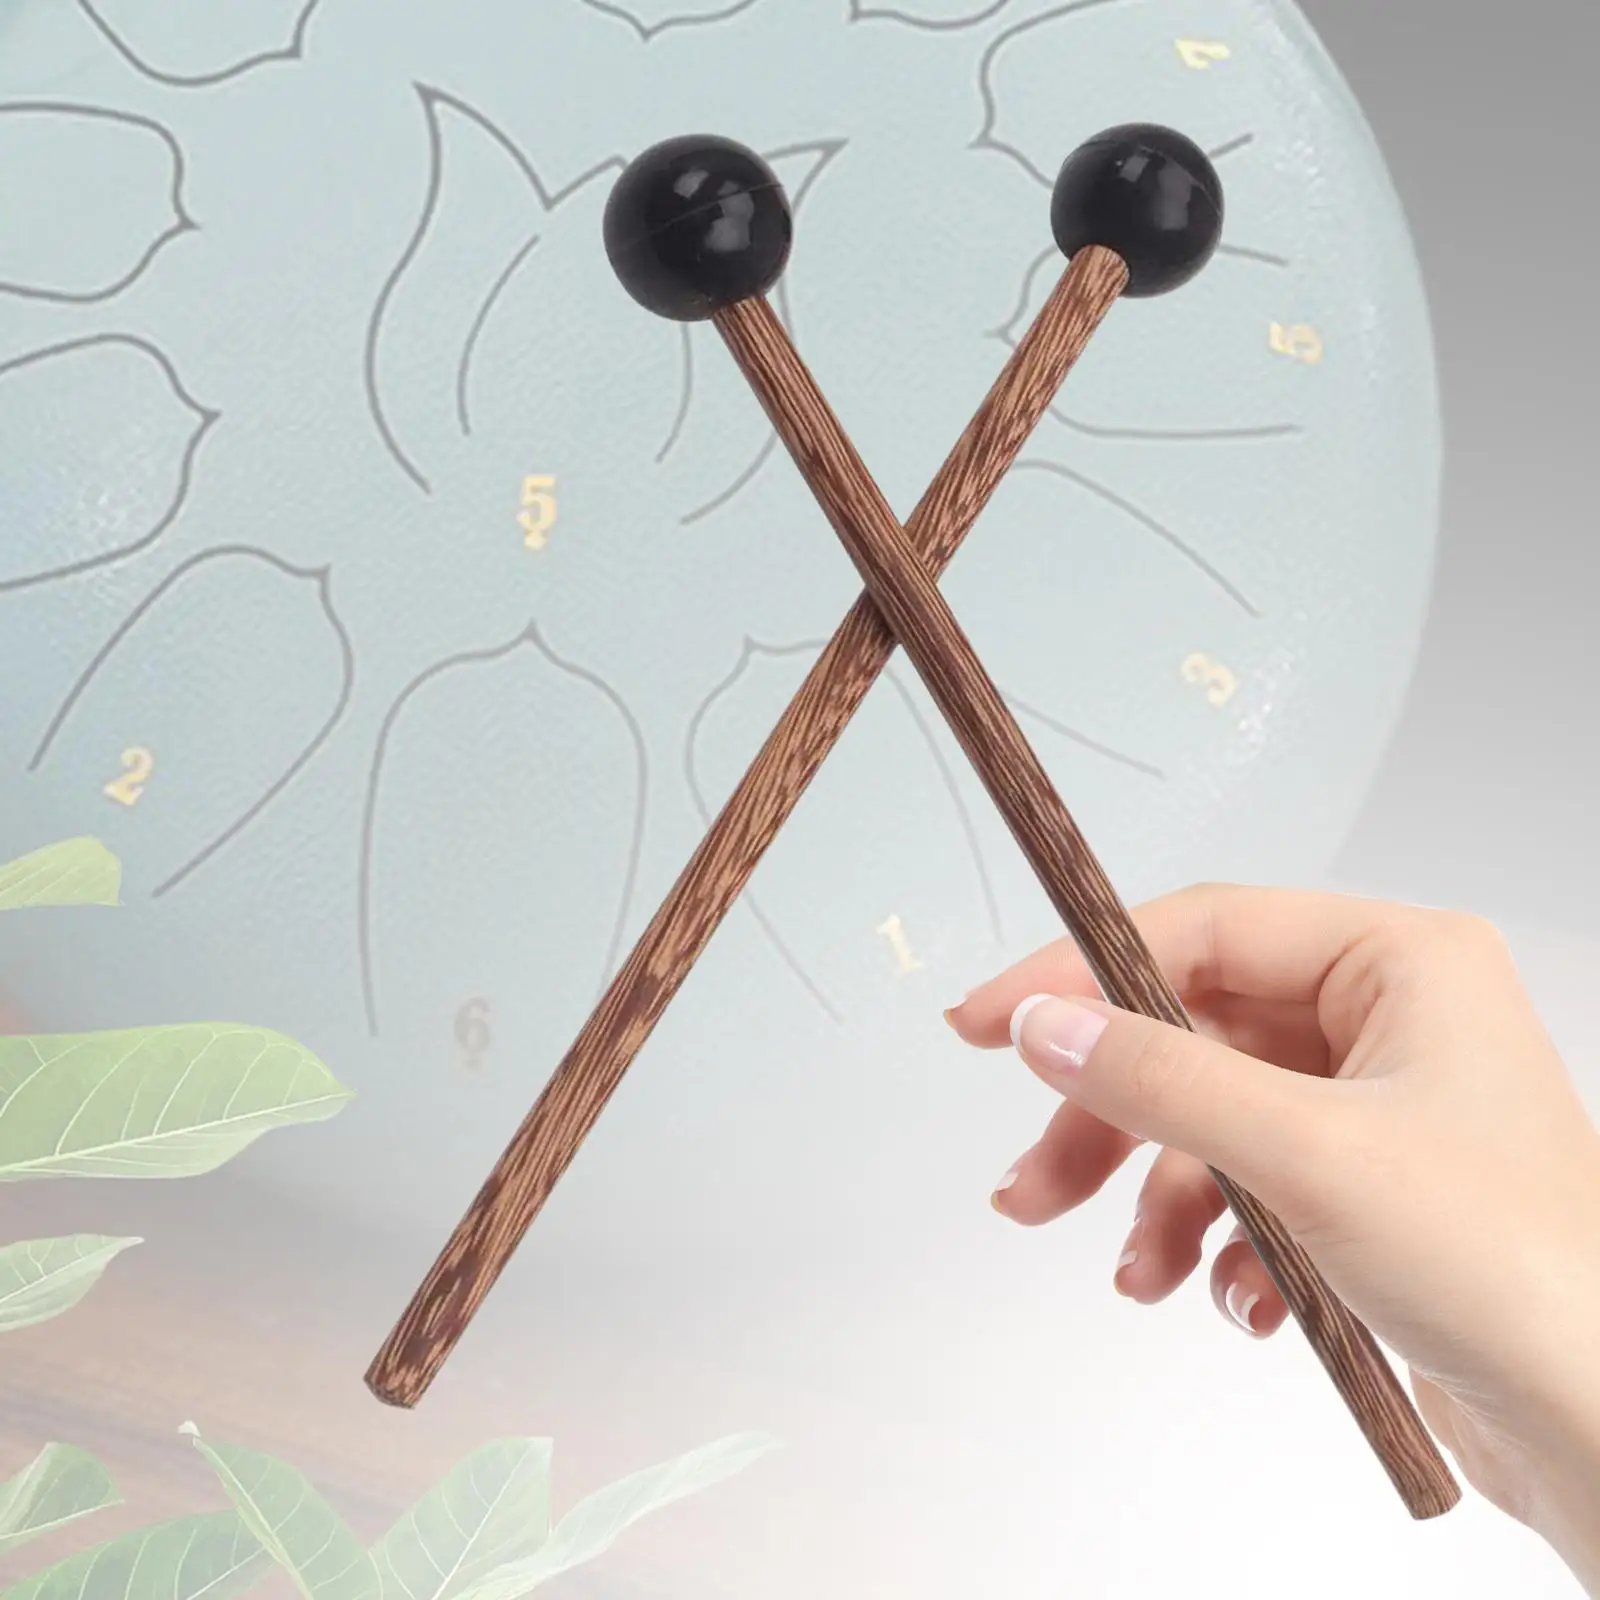 2Pcs Ethereal Drum Drumsticks Xylophone Mallet Percussion Accessories for Chime Glockenspiel